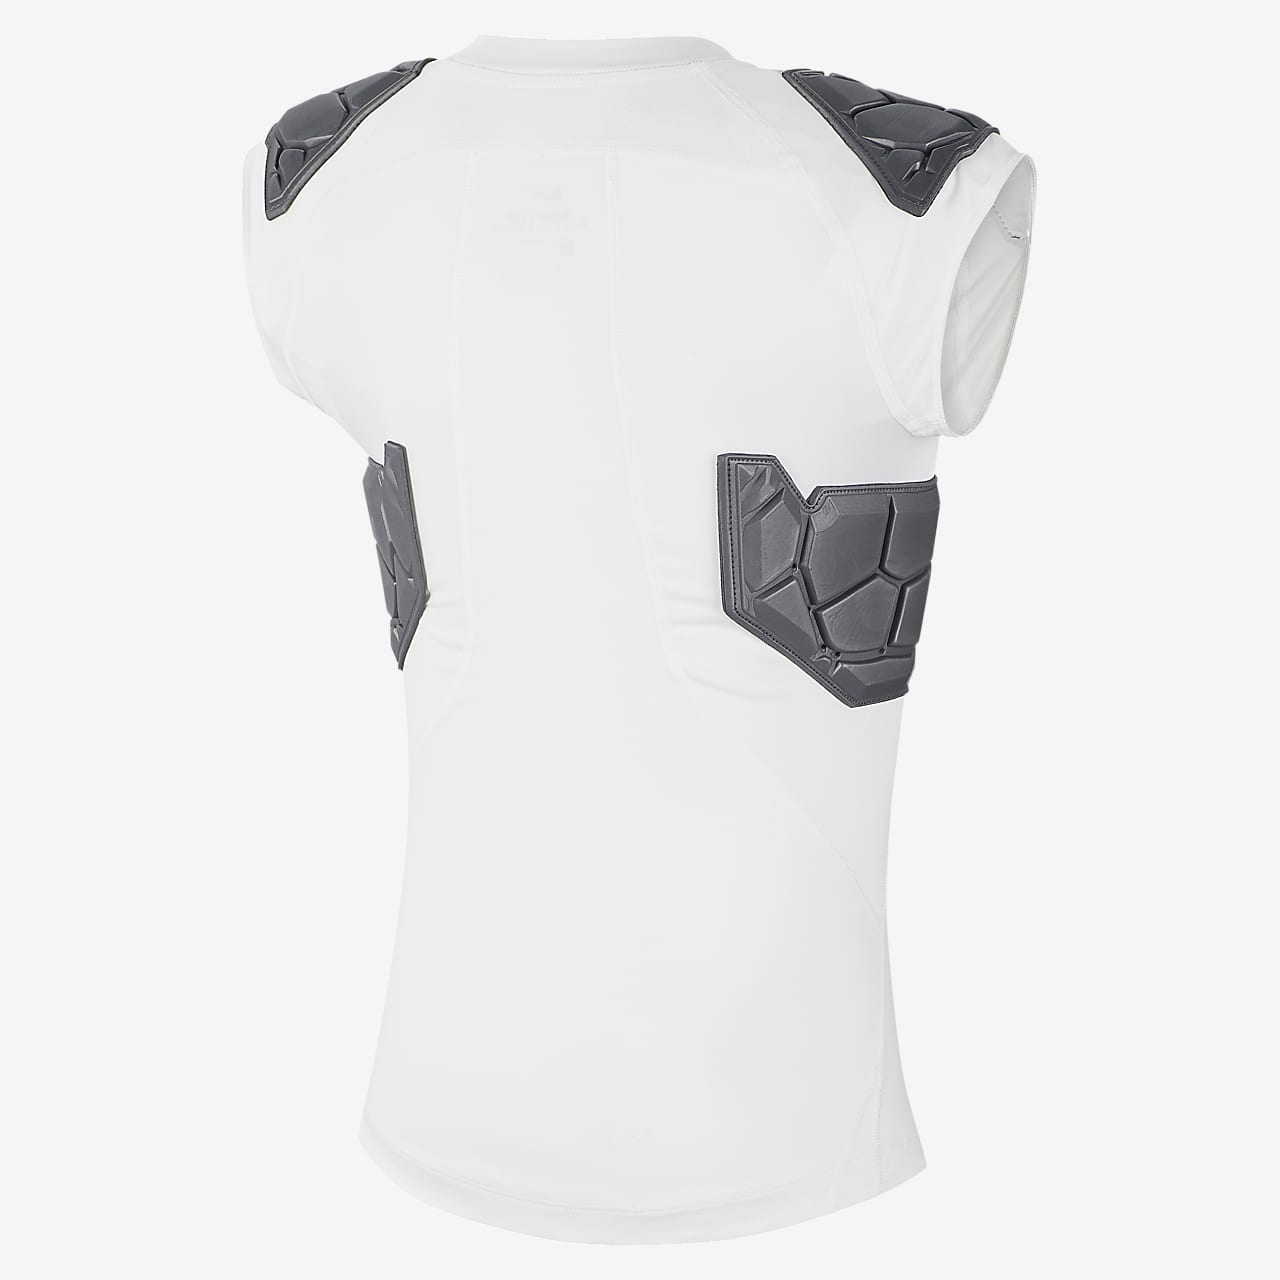 Nike Men's Pro Hyperstrong Compression Padded Shirt